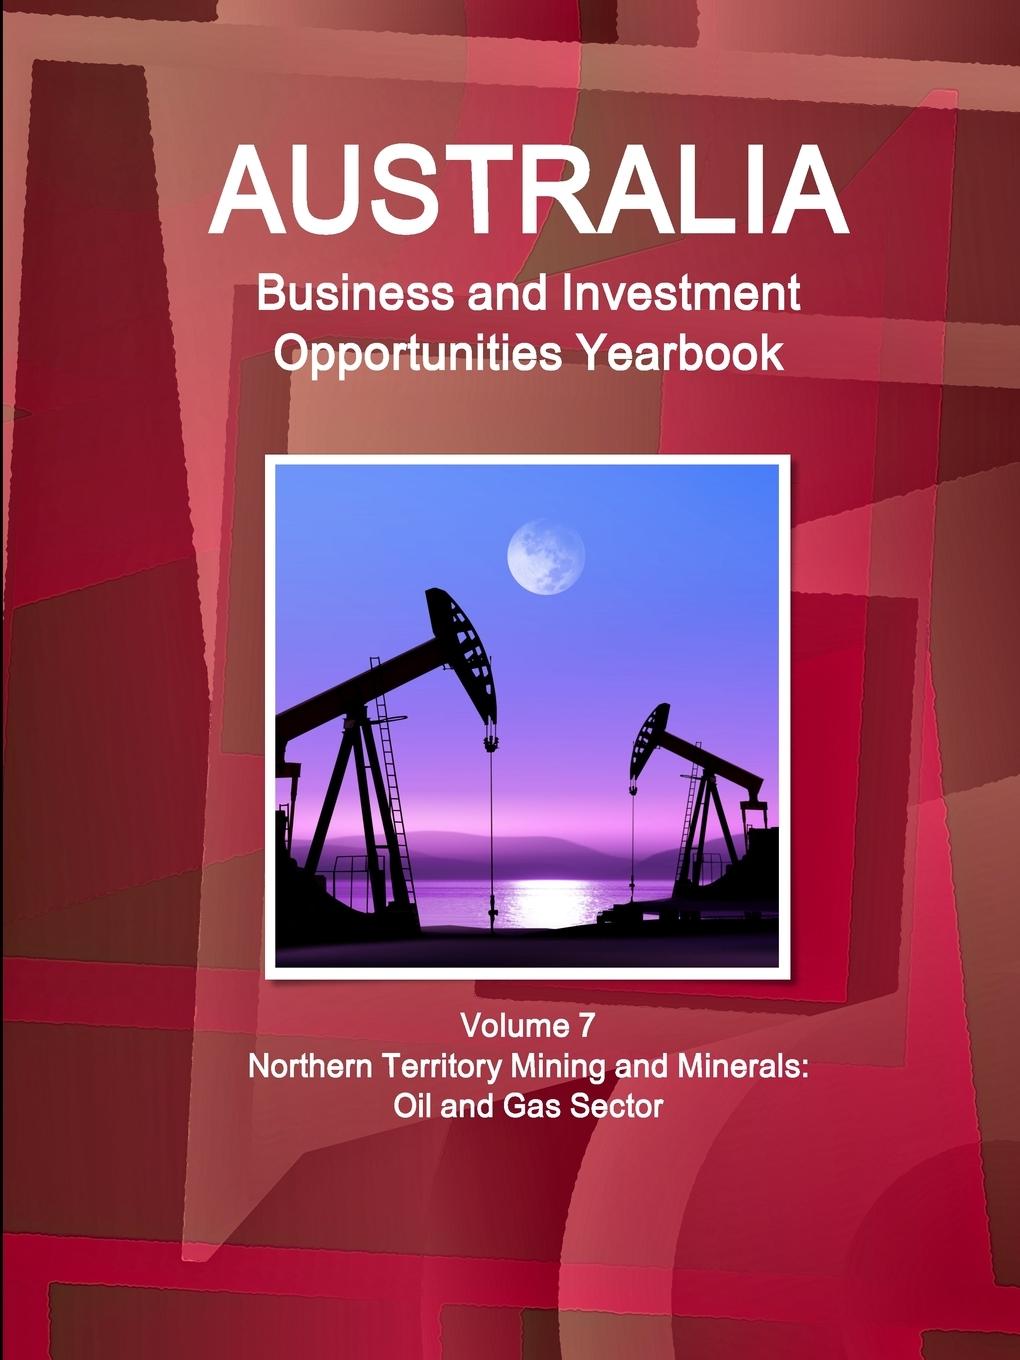 Australia Business and Investment Opportunities Yearbook Volume 7 Northern Territory Mining and Minerals - Ibp, Inc.